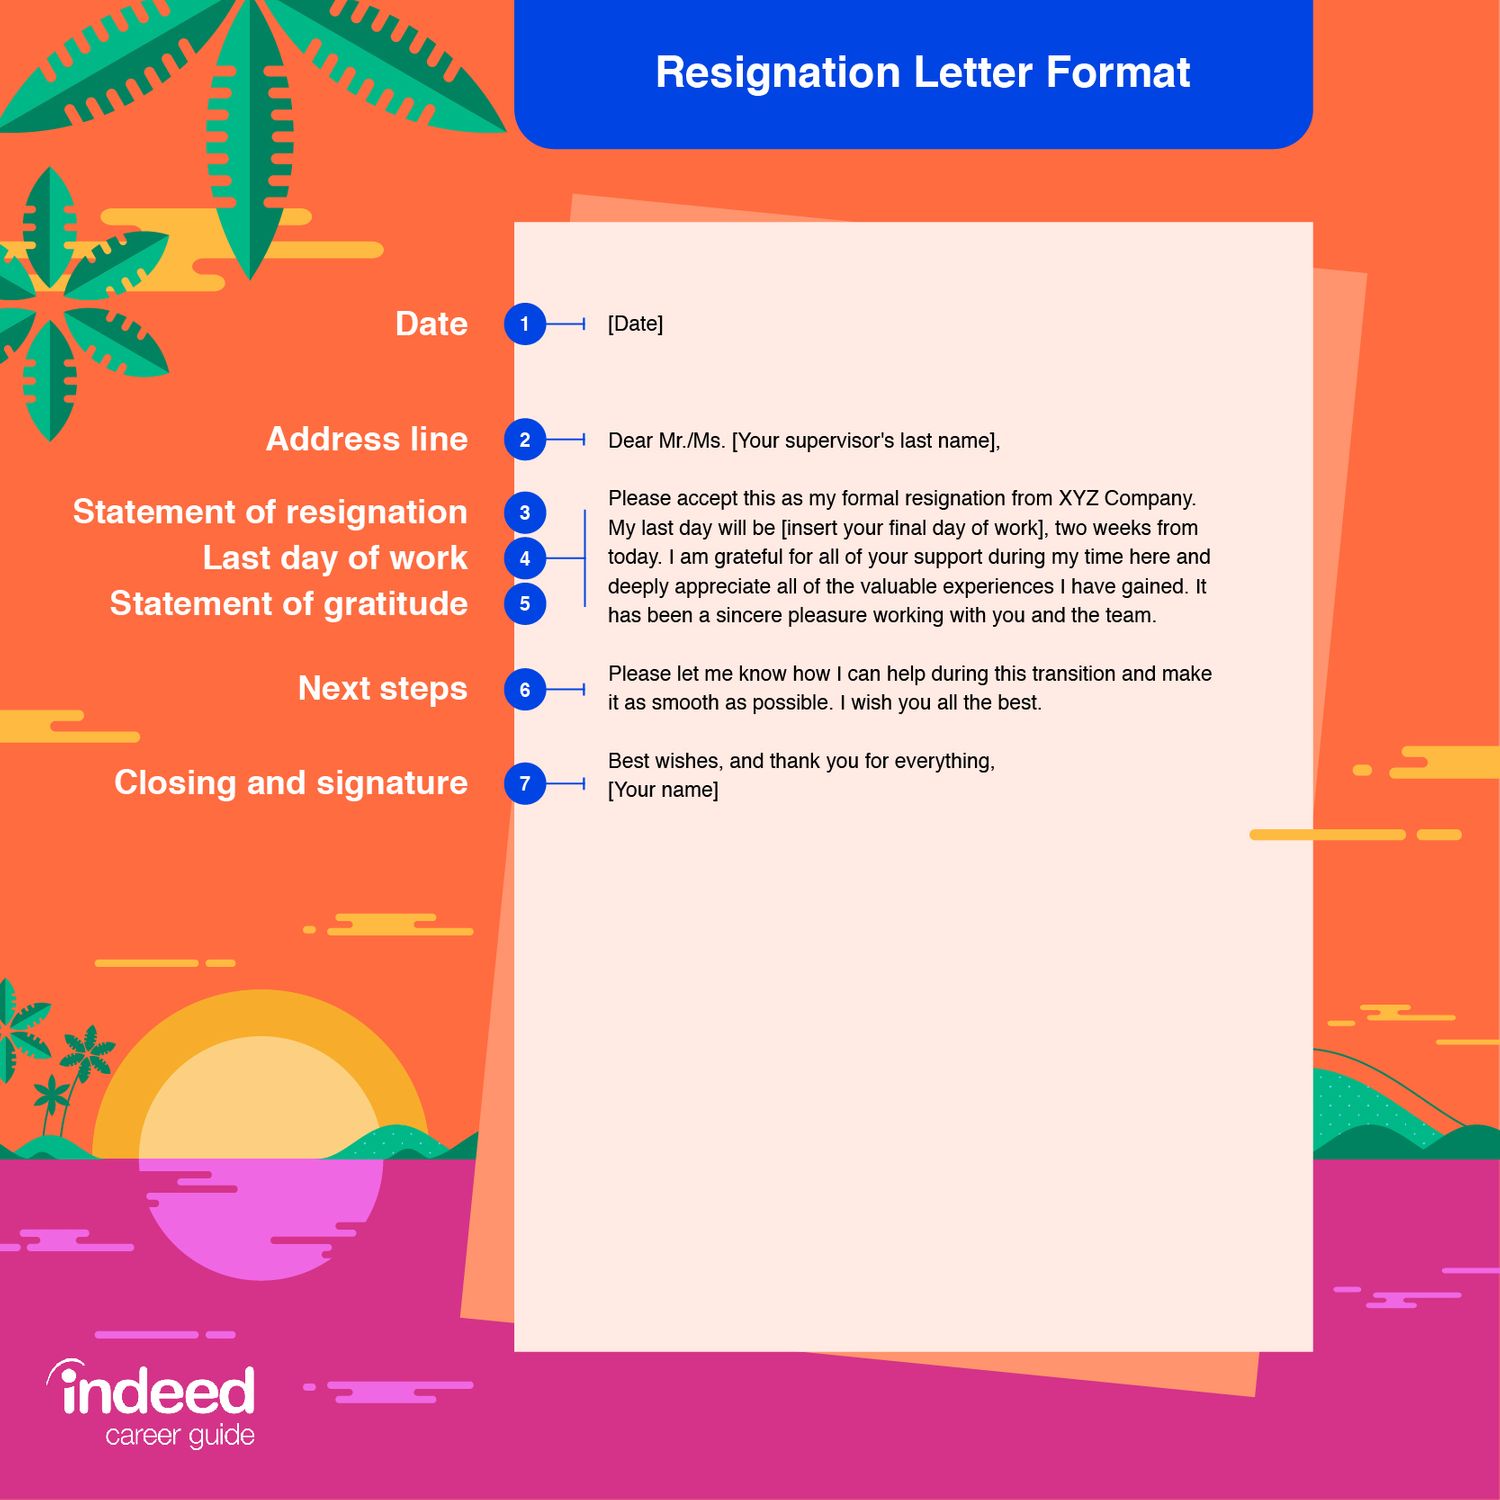 How To Write A Resignation Letter With